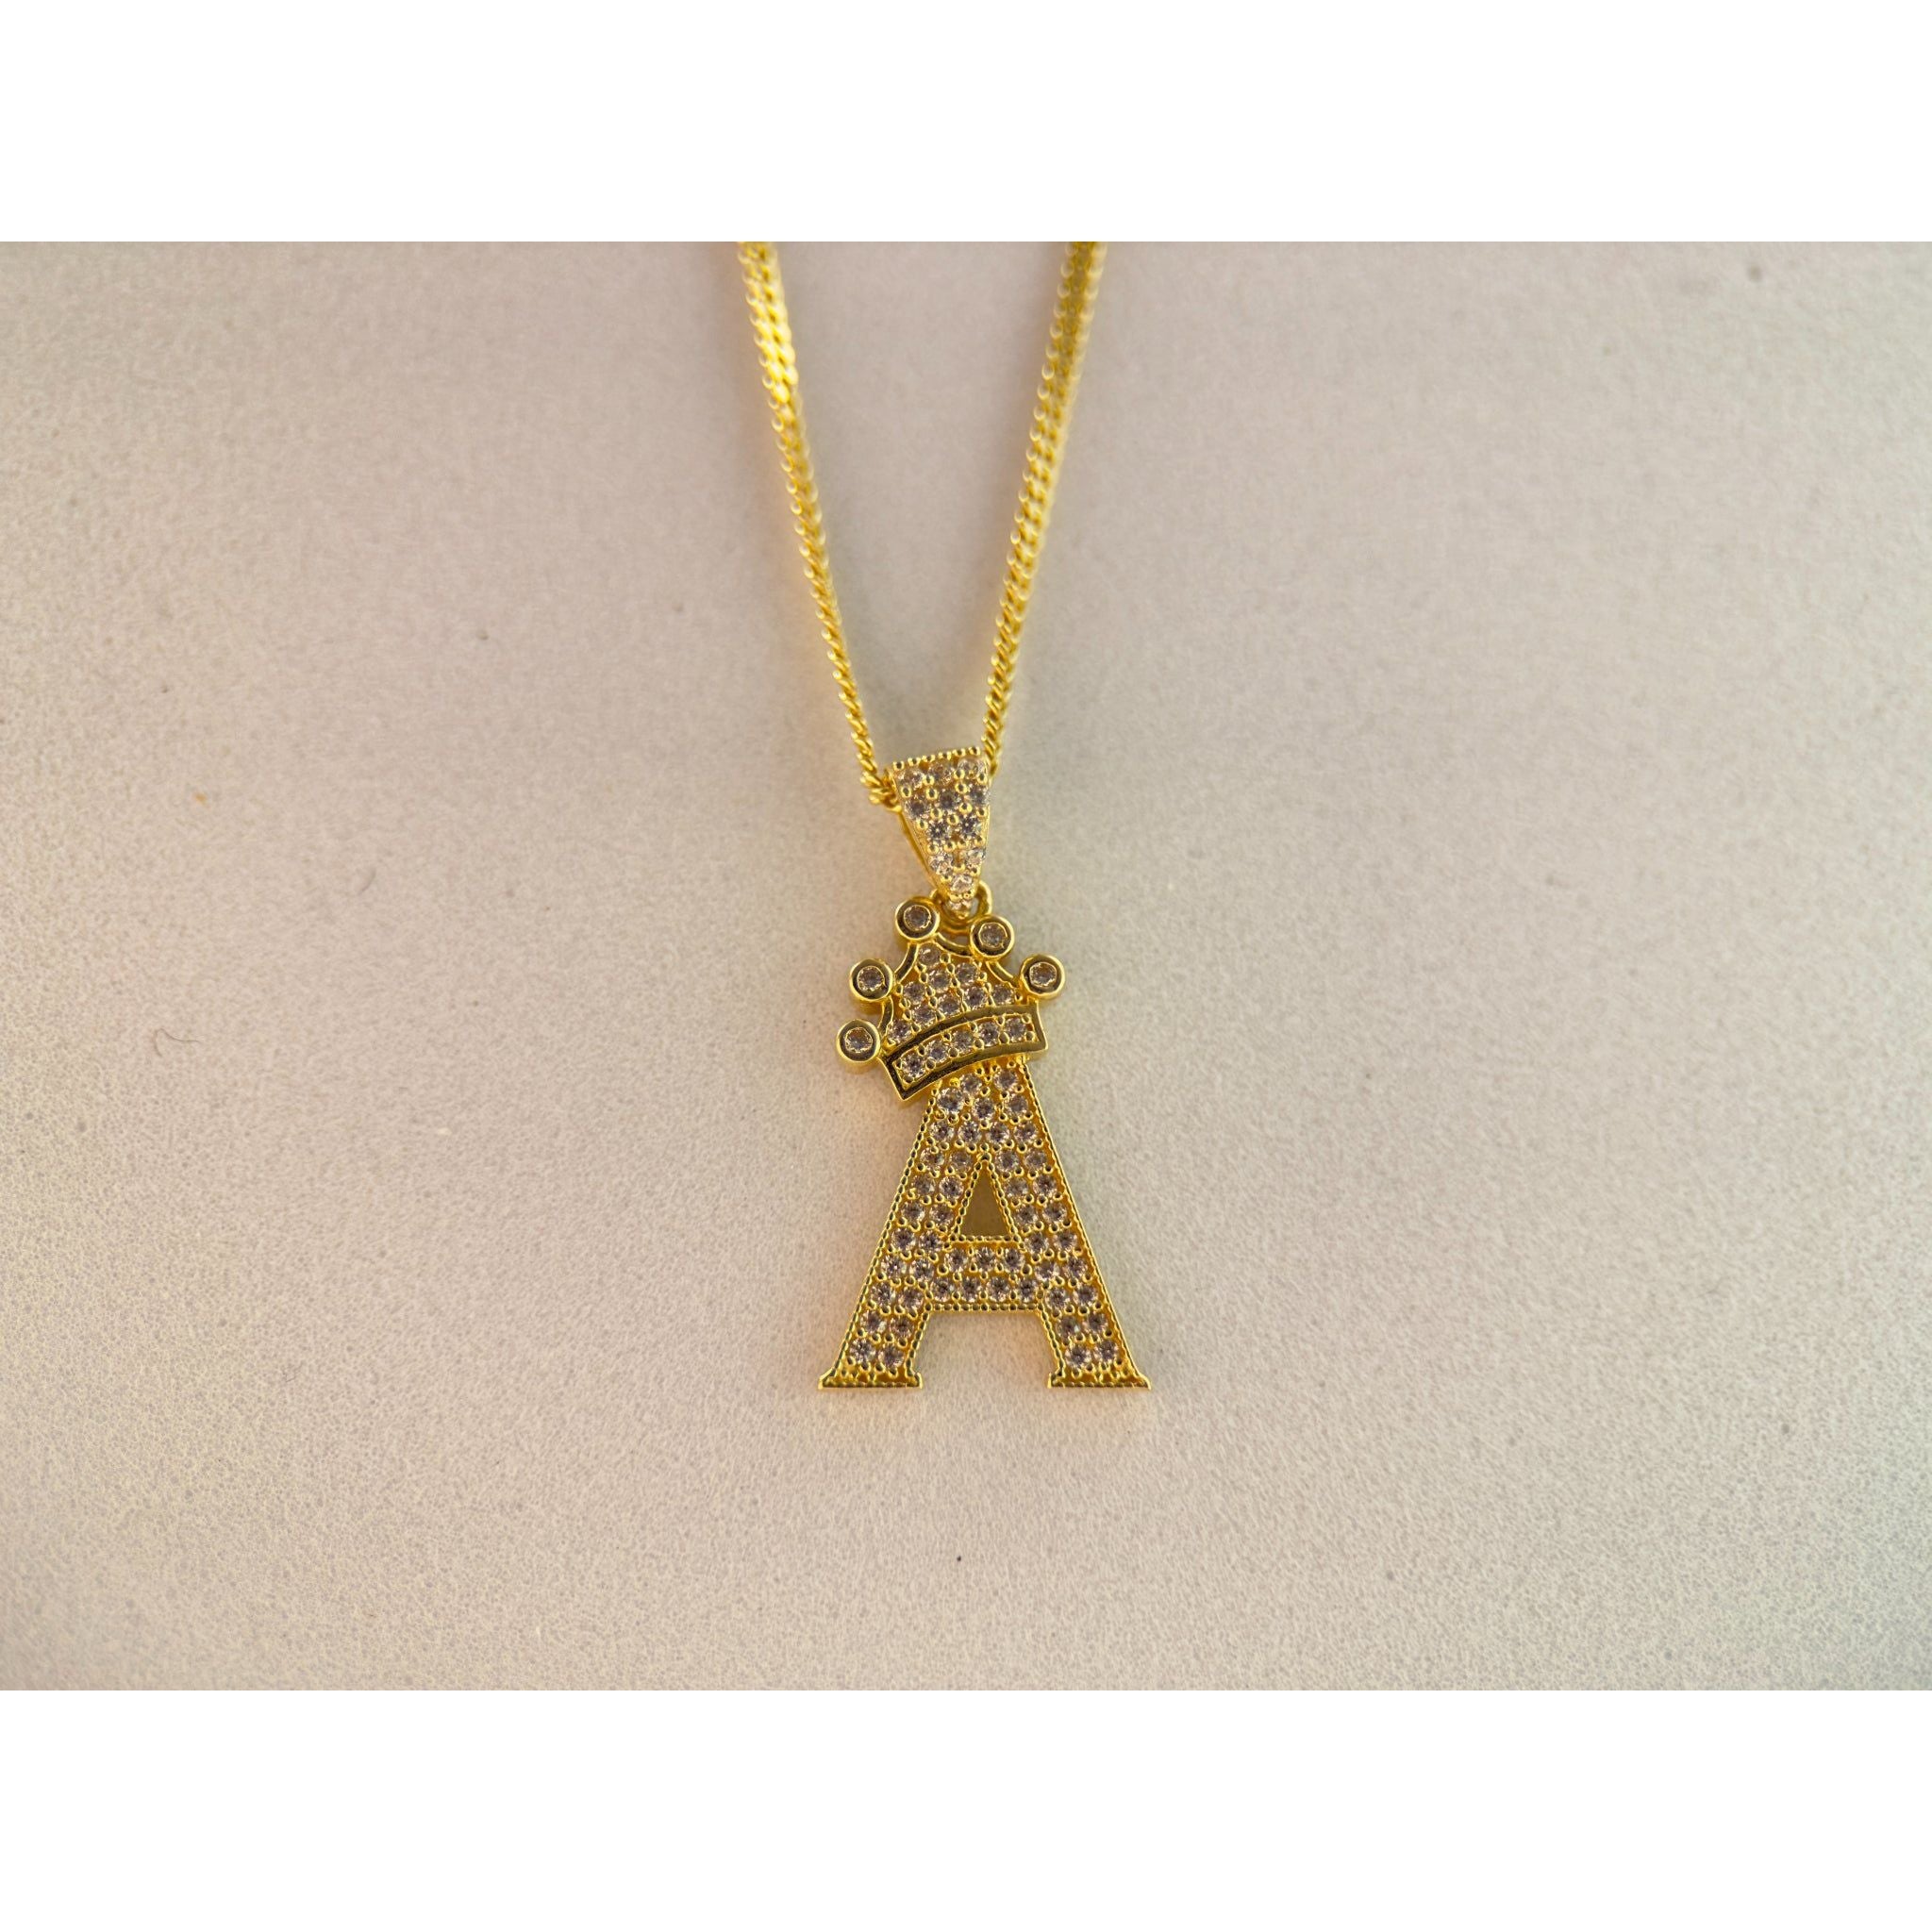 DR1922 - 14K Yellow Gold - Lab Created Stones - Gold Chain & Charm - Letter A w/Crown